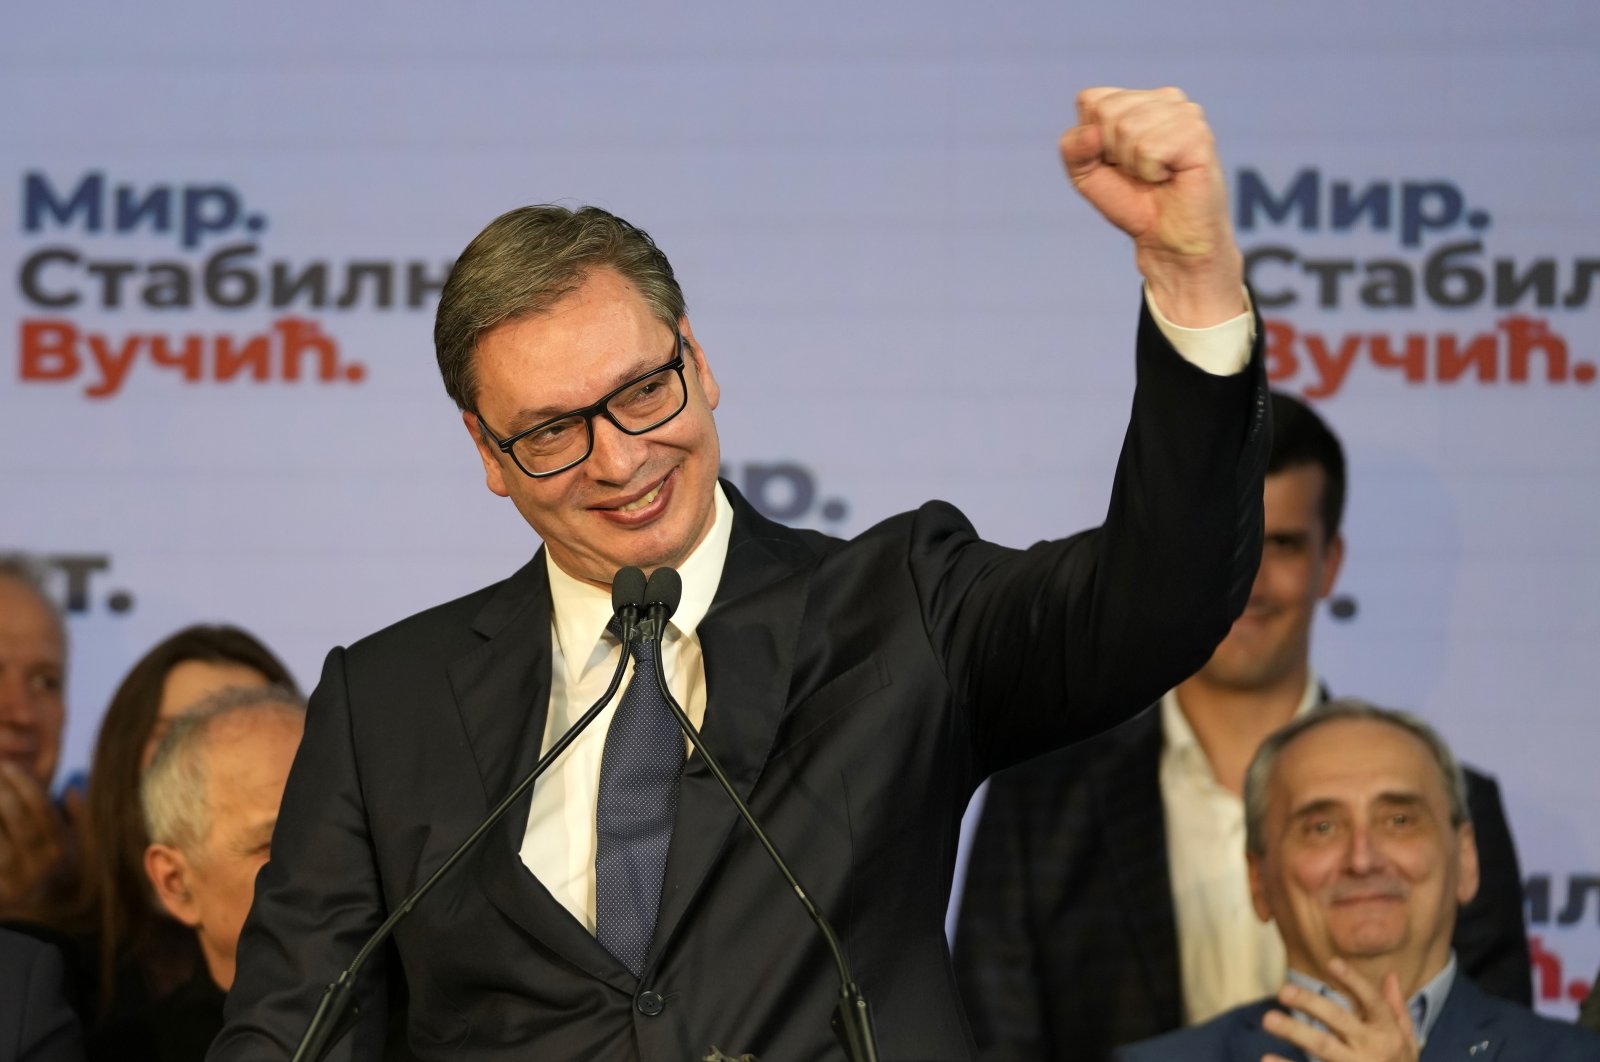 Serbian President Aleksandar Vucic gestures during a news conference after claiming victory for a second term in the presidential election in Belgrade, Serbia, April 3, 2022. (AP Photo)